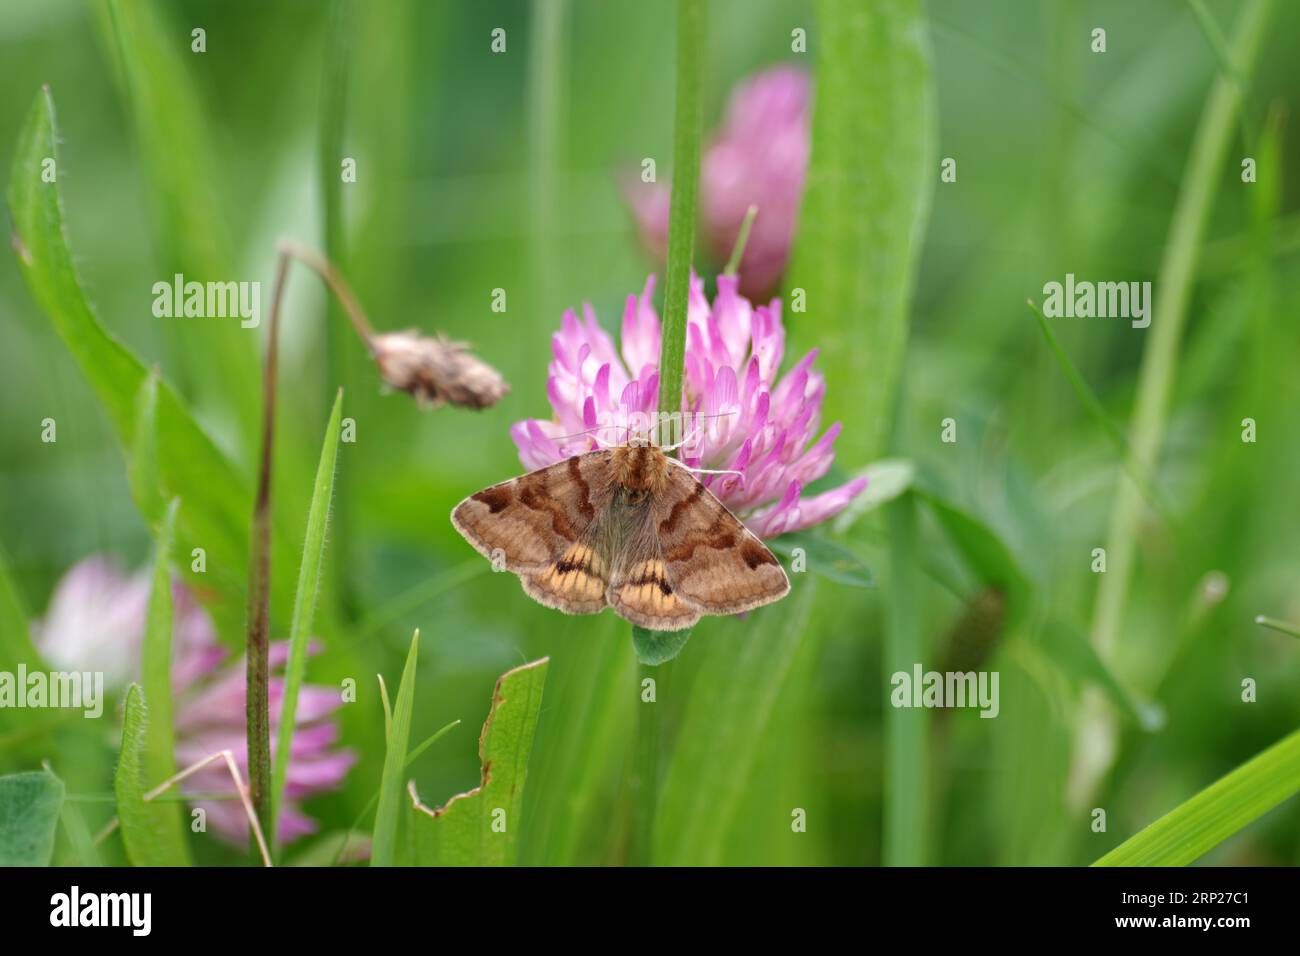 Burnet companion (Euclidia glyphica), butterfly, moth, insect, diurnal, red clover, meadow, Germany, close-up of brown day owl with open wings. The Stock Photo